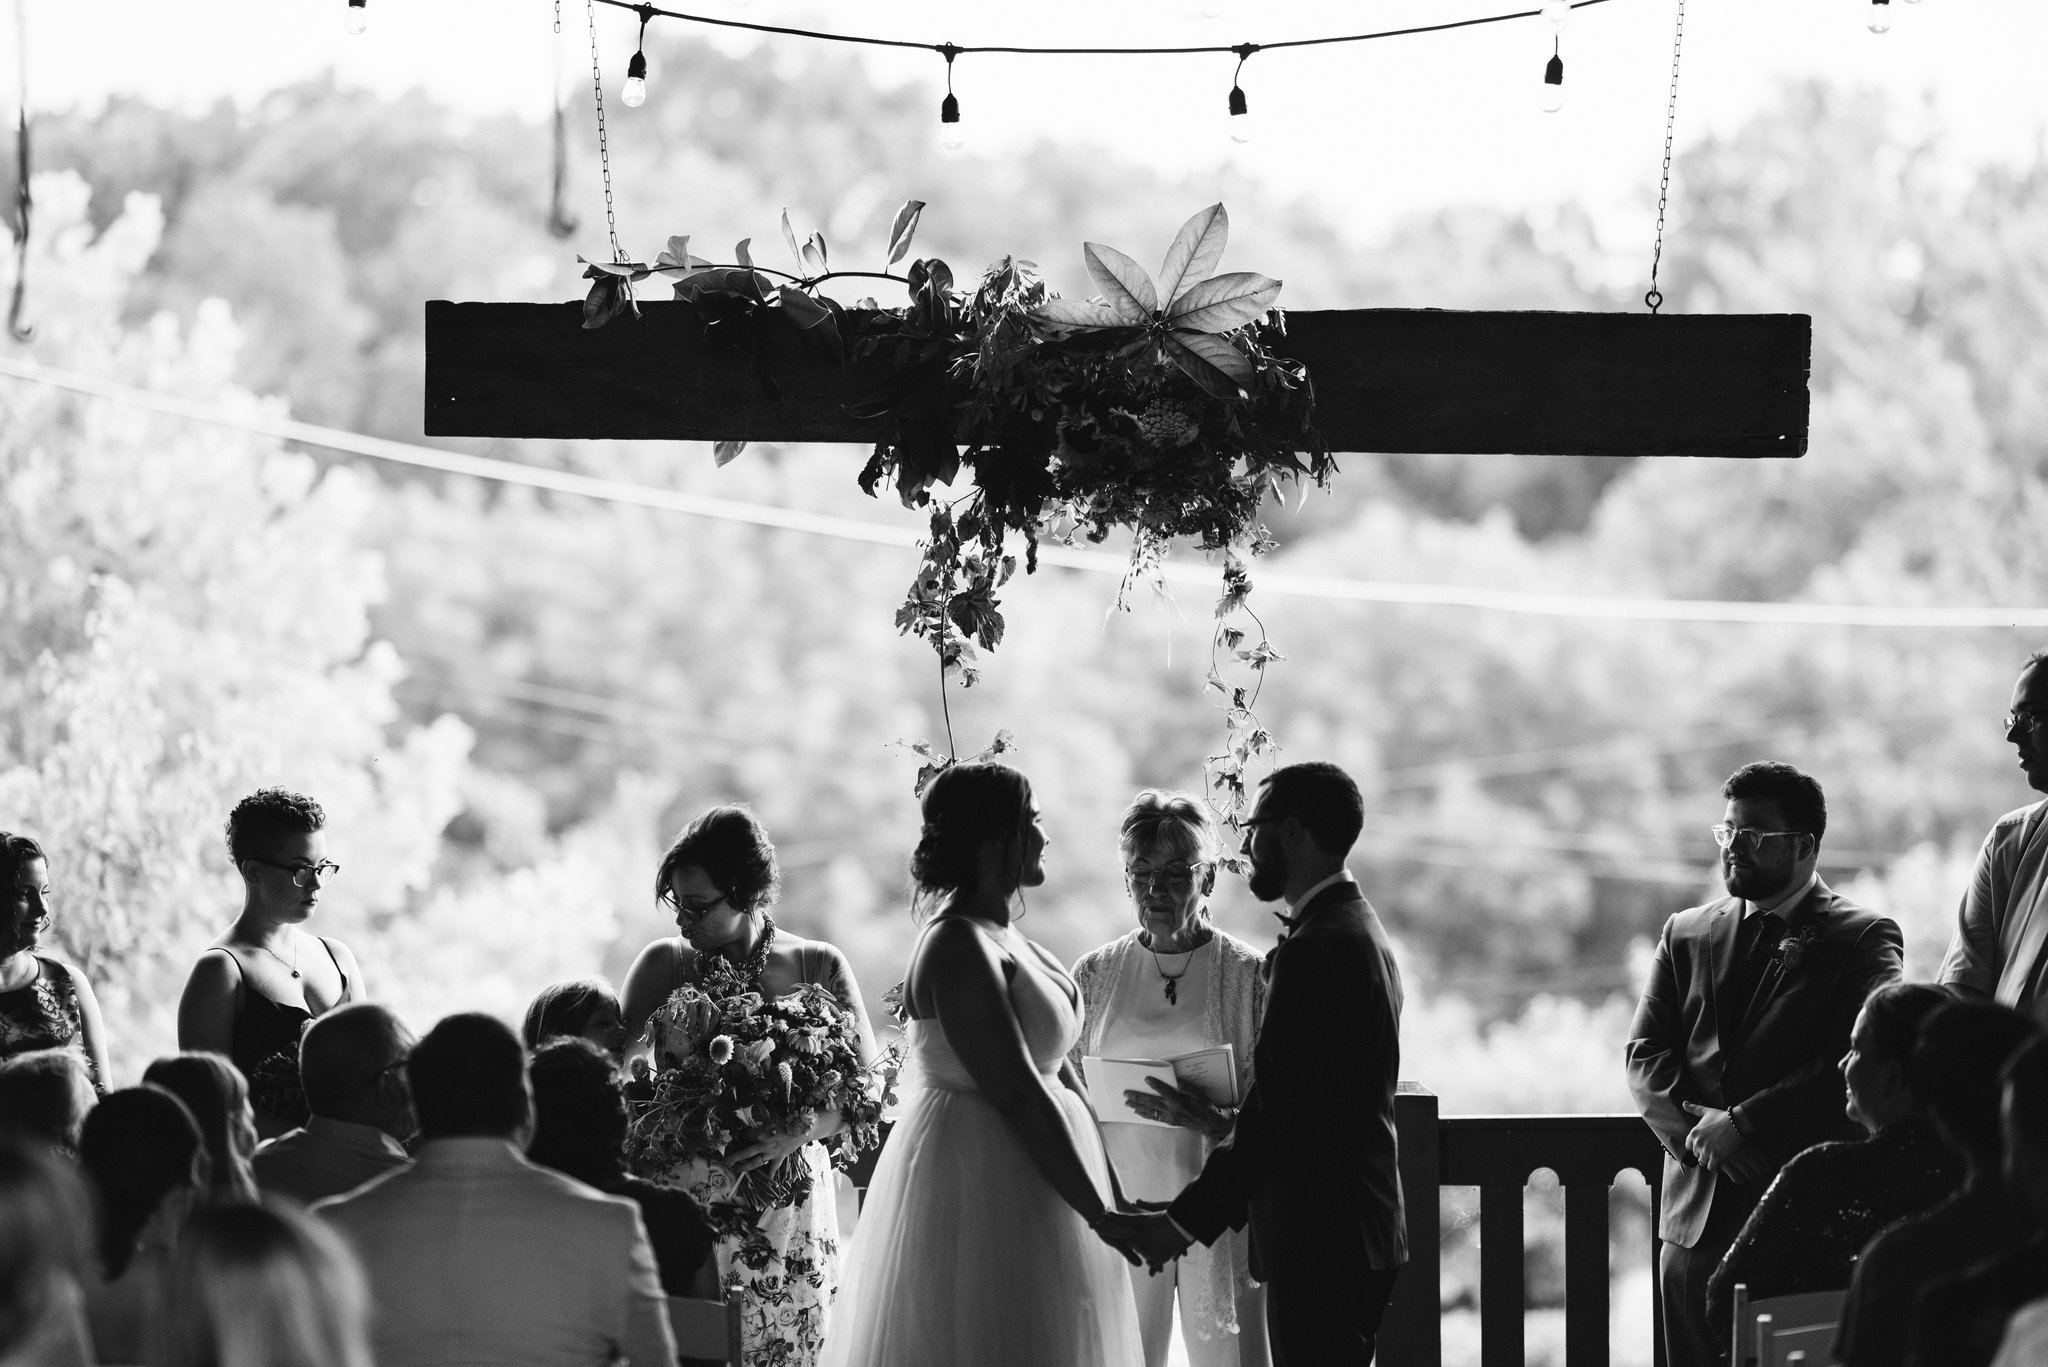 Rocklands Farm, Maryland, Intimate Wedding, Baltimore Wedding Photographer, Rustic, Romantic, Barn Wedding, Bride and Groom Holding Hands in Front of Officiant, Black and White Photo